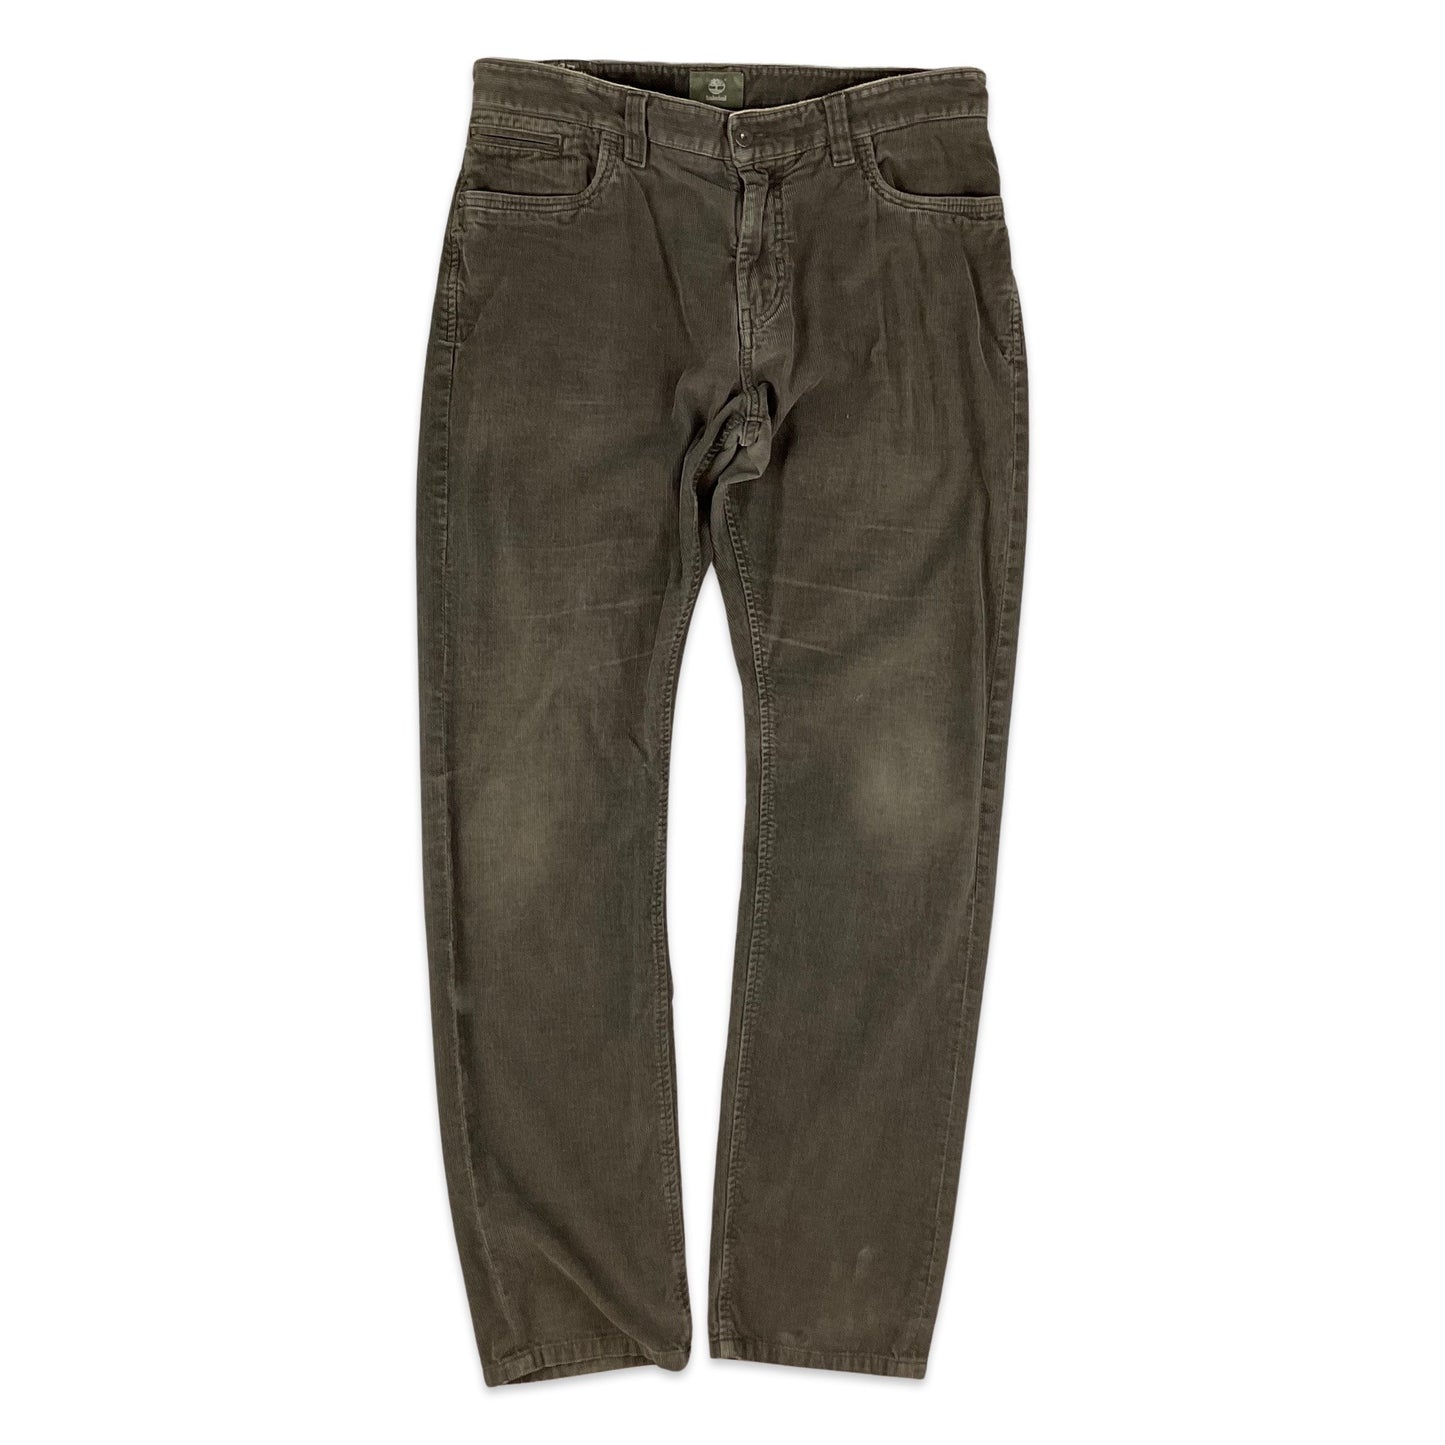 Timberland Brown Corduroy Trousers 36W 33L